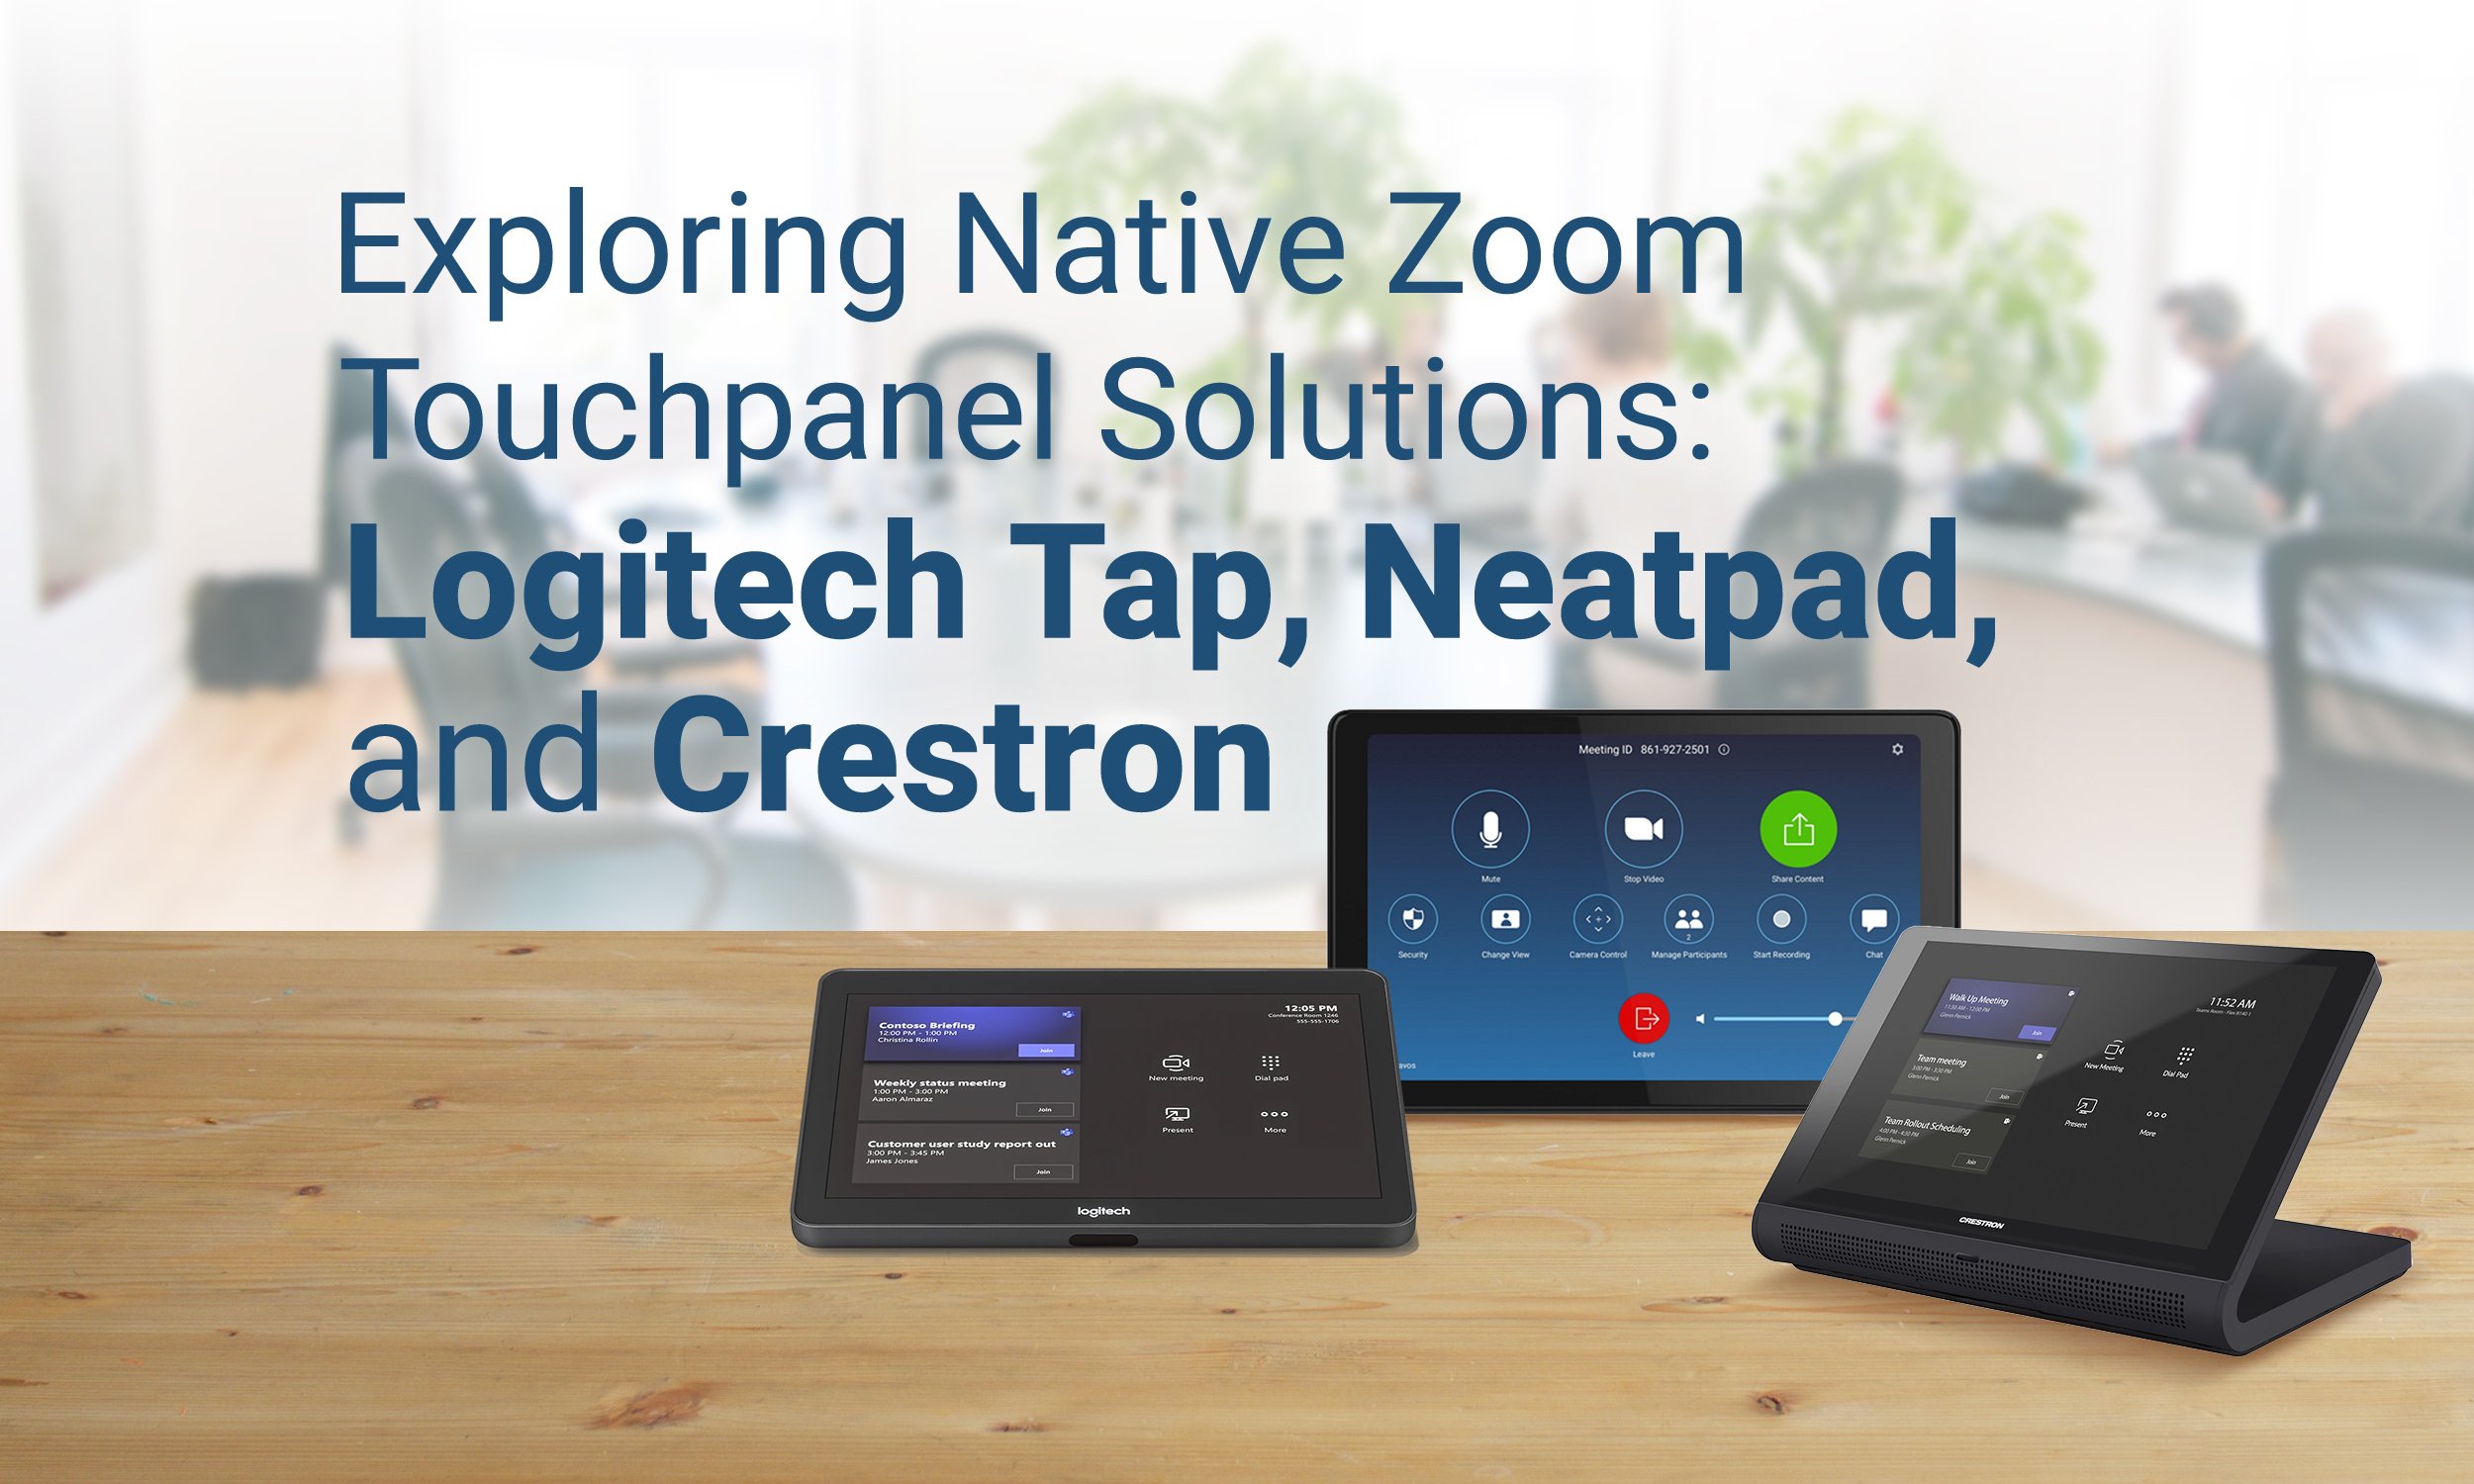 Exploring Native Zoom Touch Panel Solutions: Logitech Tap, Neatpad, and Crestron